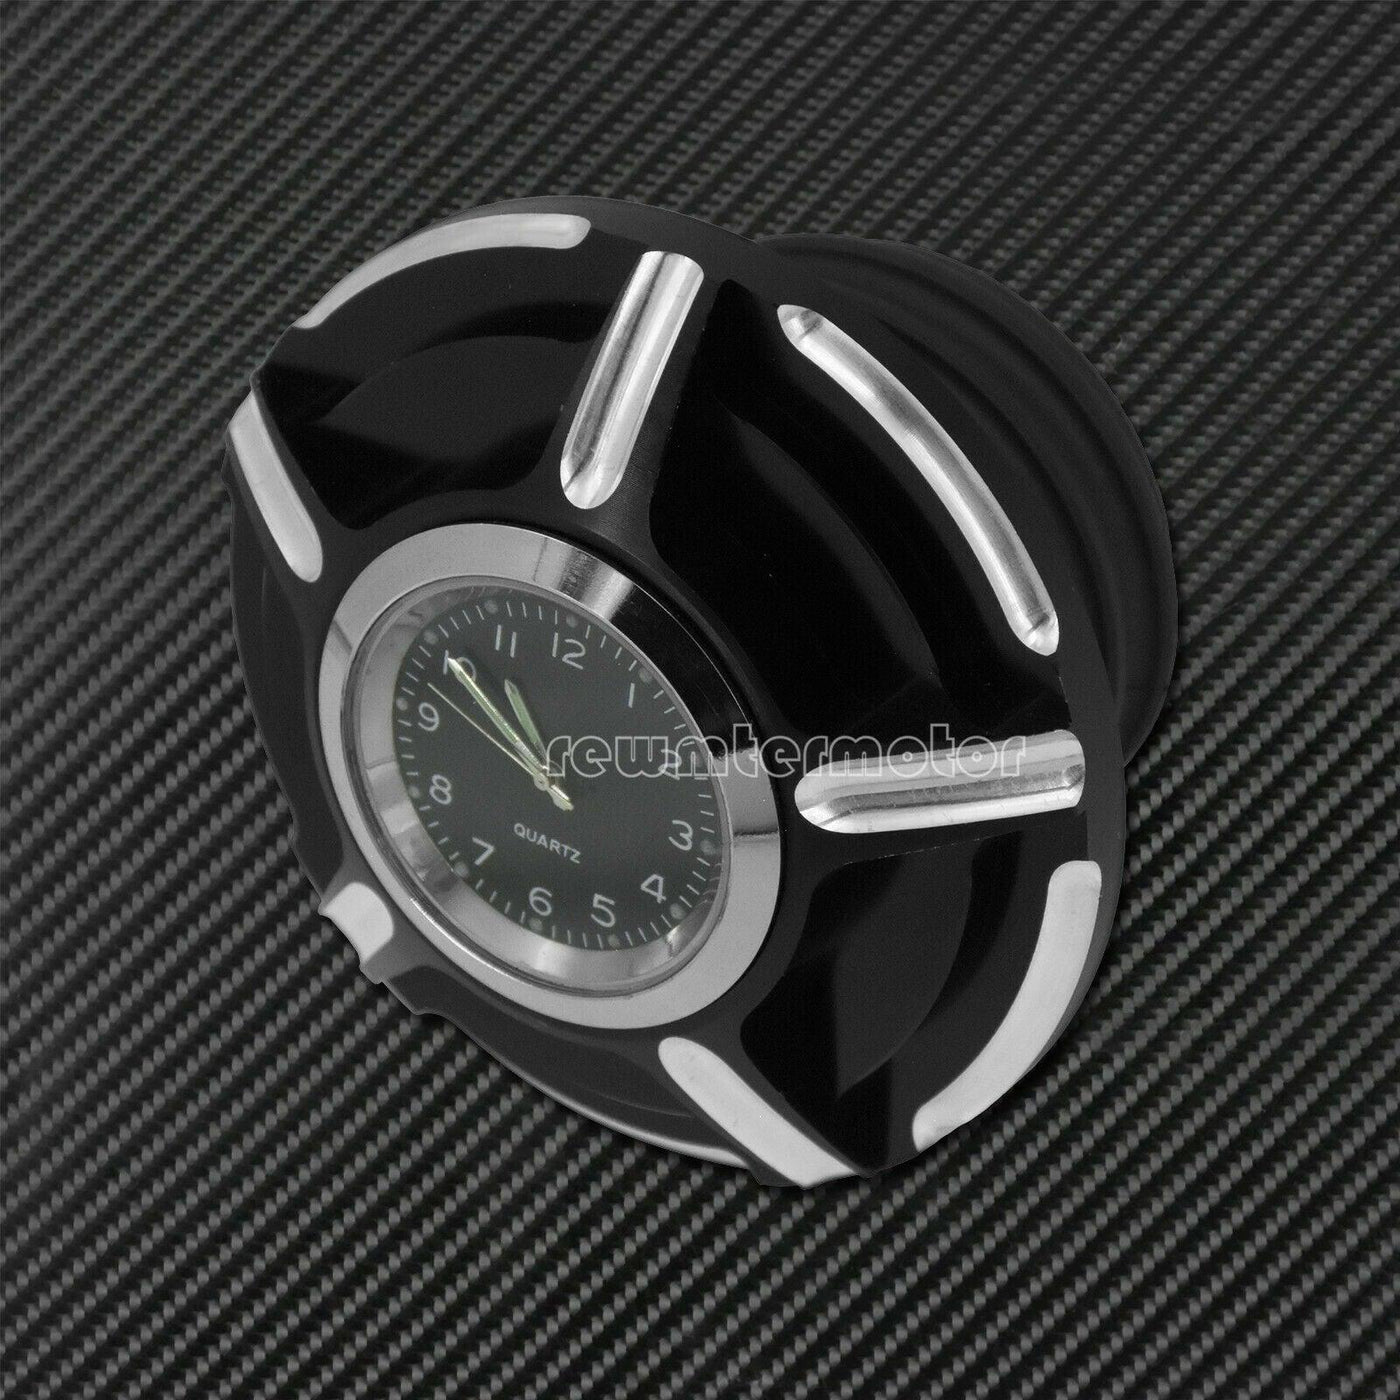 Motorcycle Billet Aluminum Gas Cap Fuel Tank Cover with Watch Fit For Harley - Moto Life Products